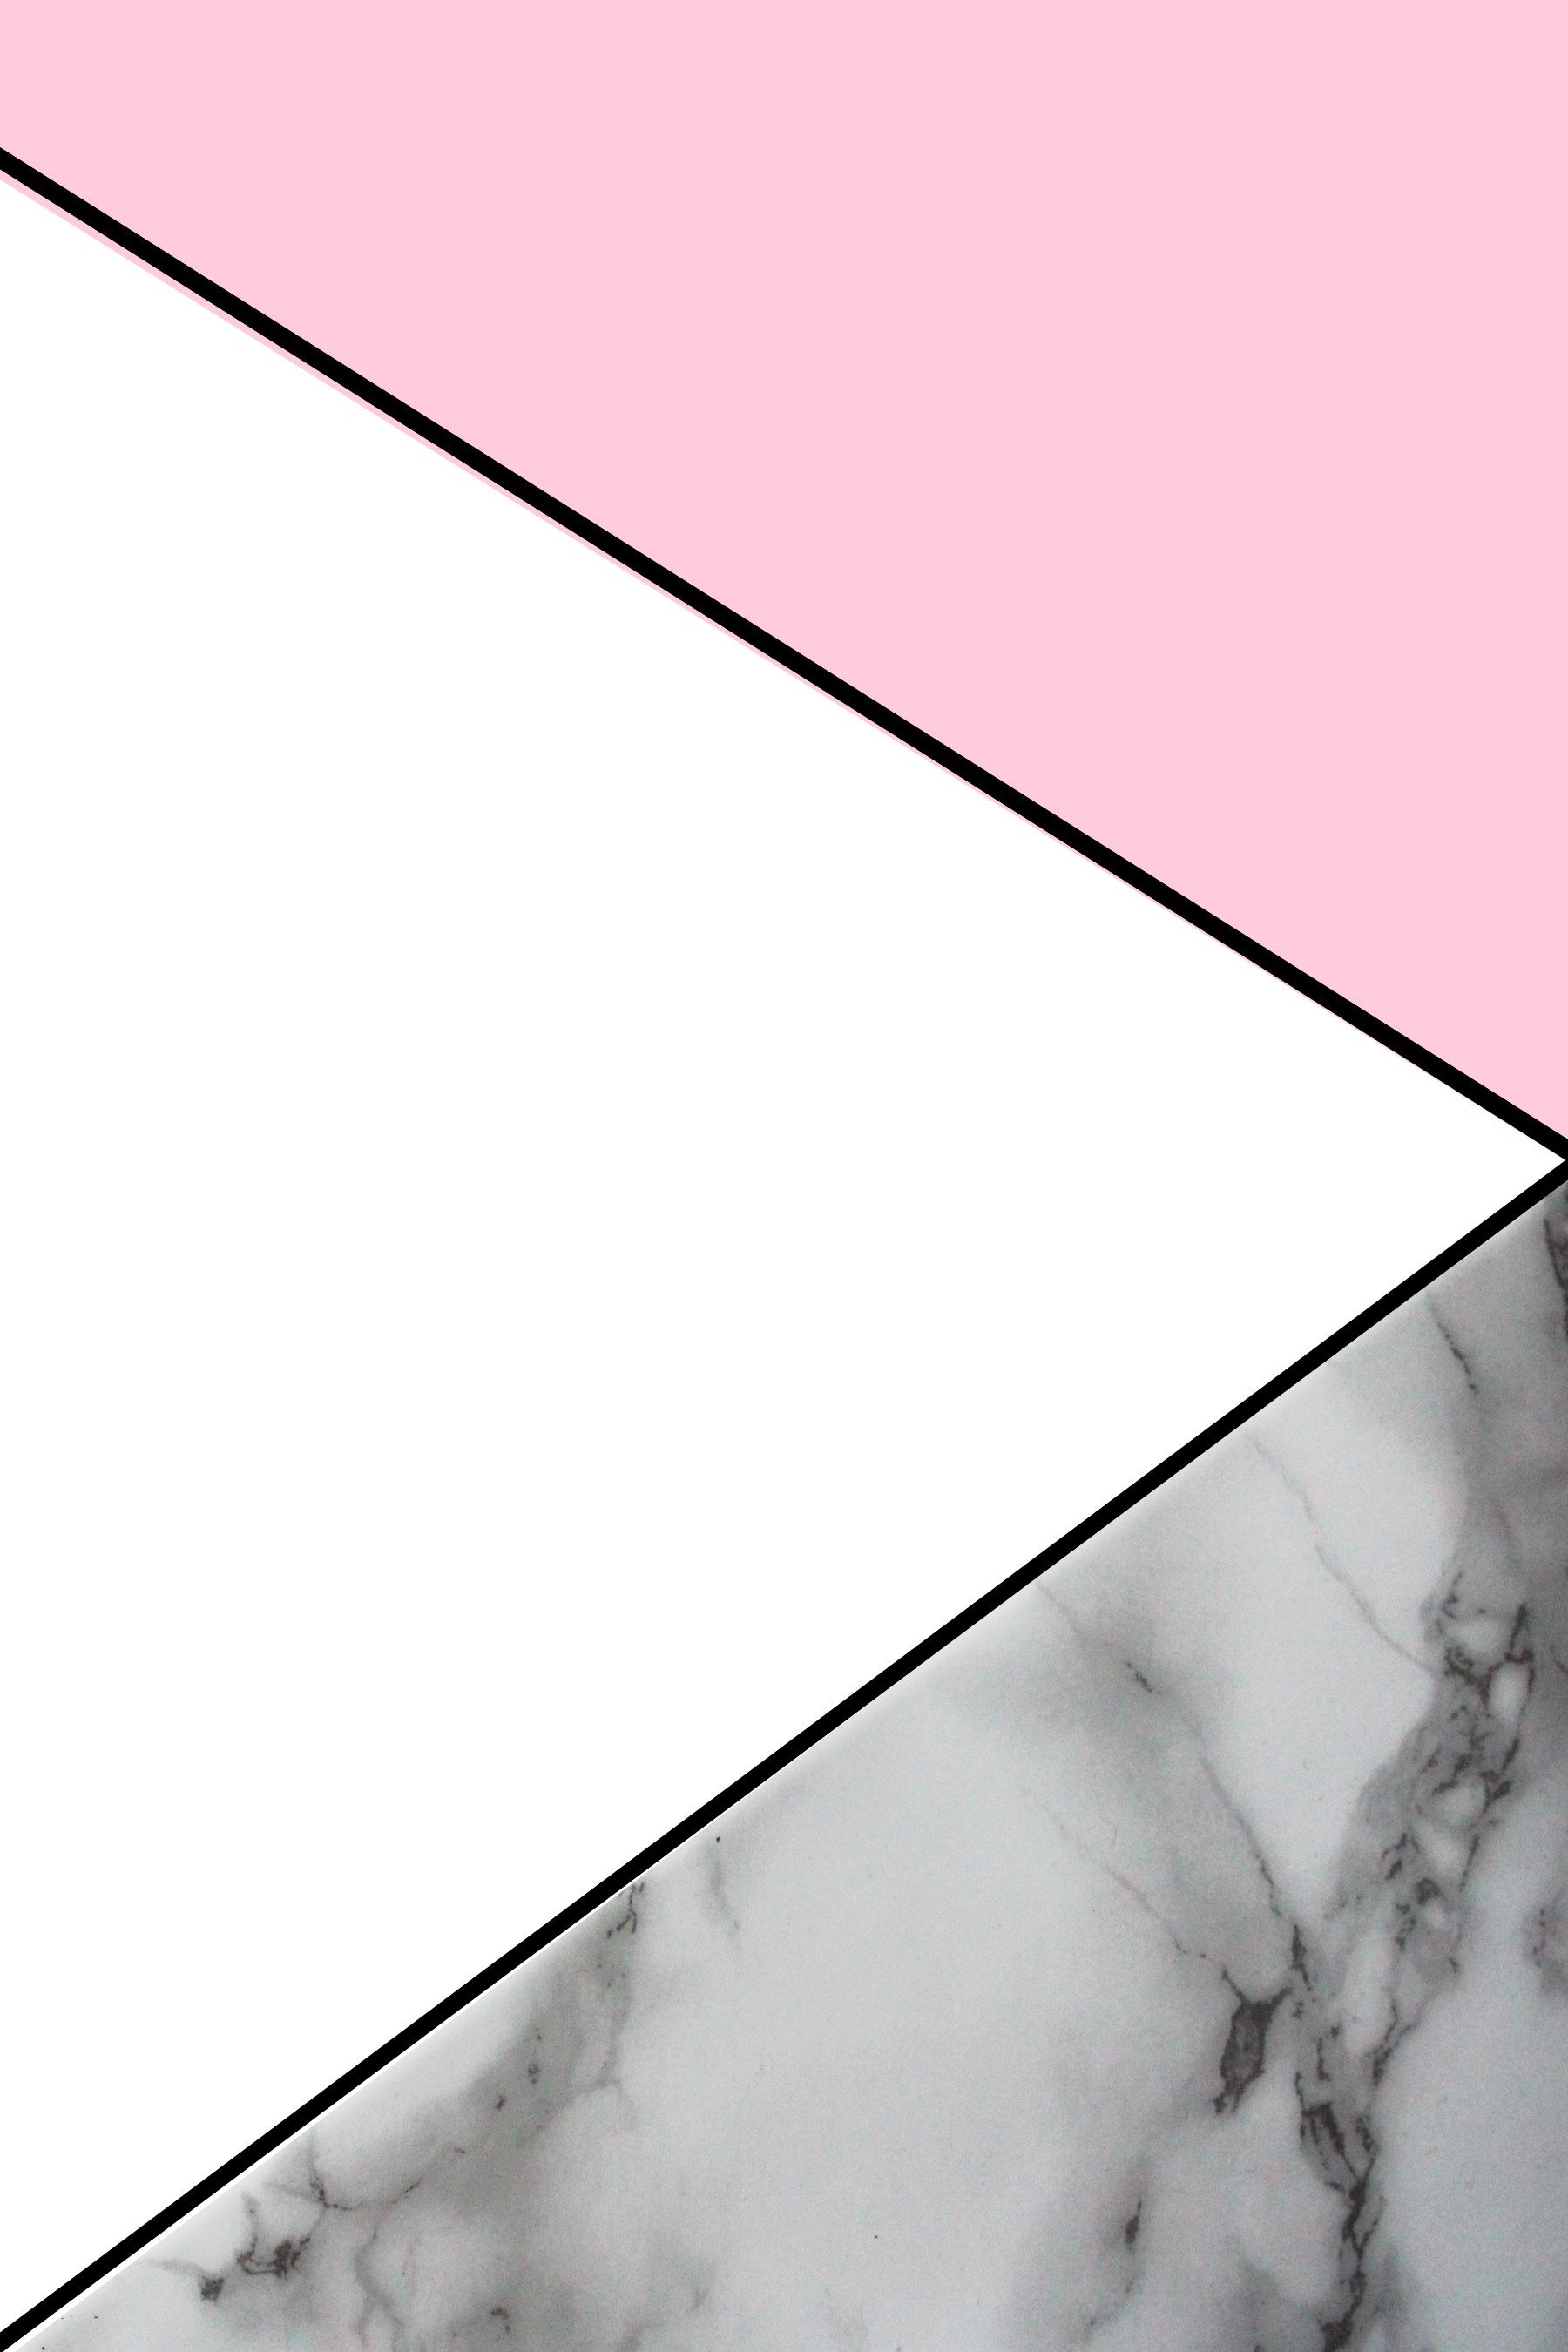 Phone wallpaper with marble and pretty pink